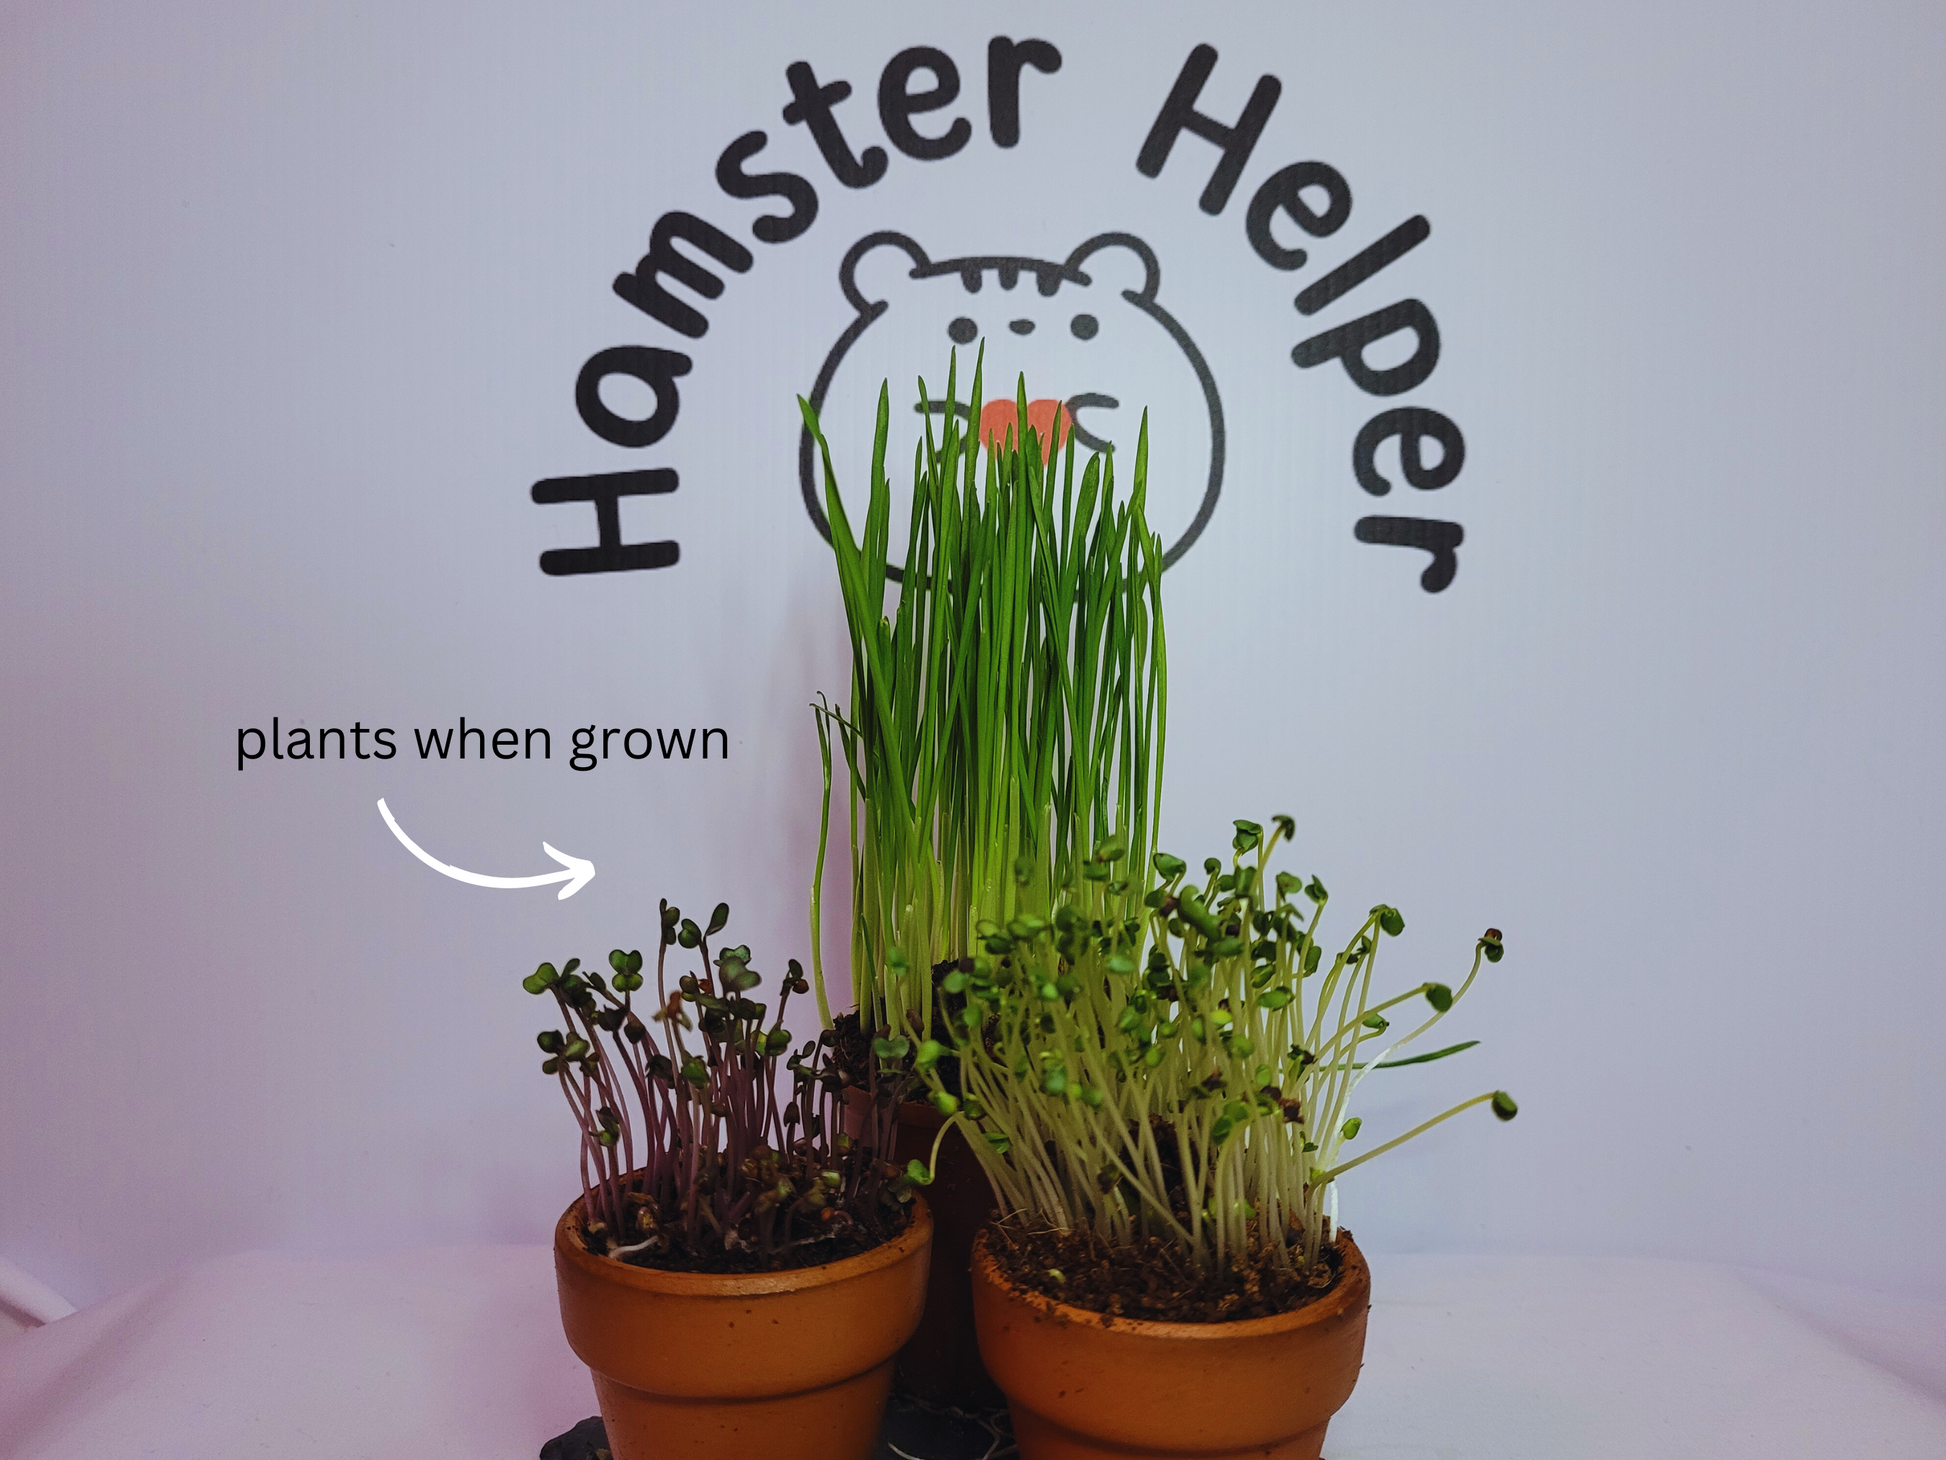 Three hamster safe microgreens including purple cabbage, broccoli and wheatgrass, pictured in terracotta pots, grouped together in front of the Hamster Helper logo